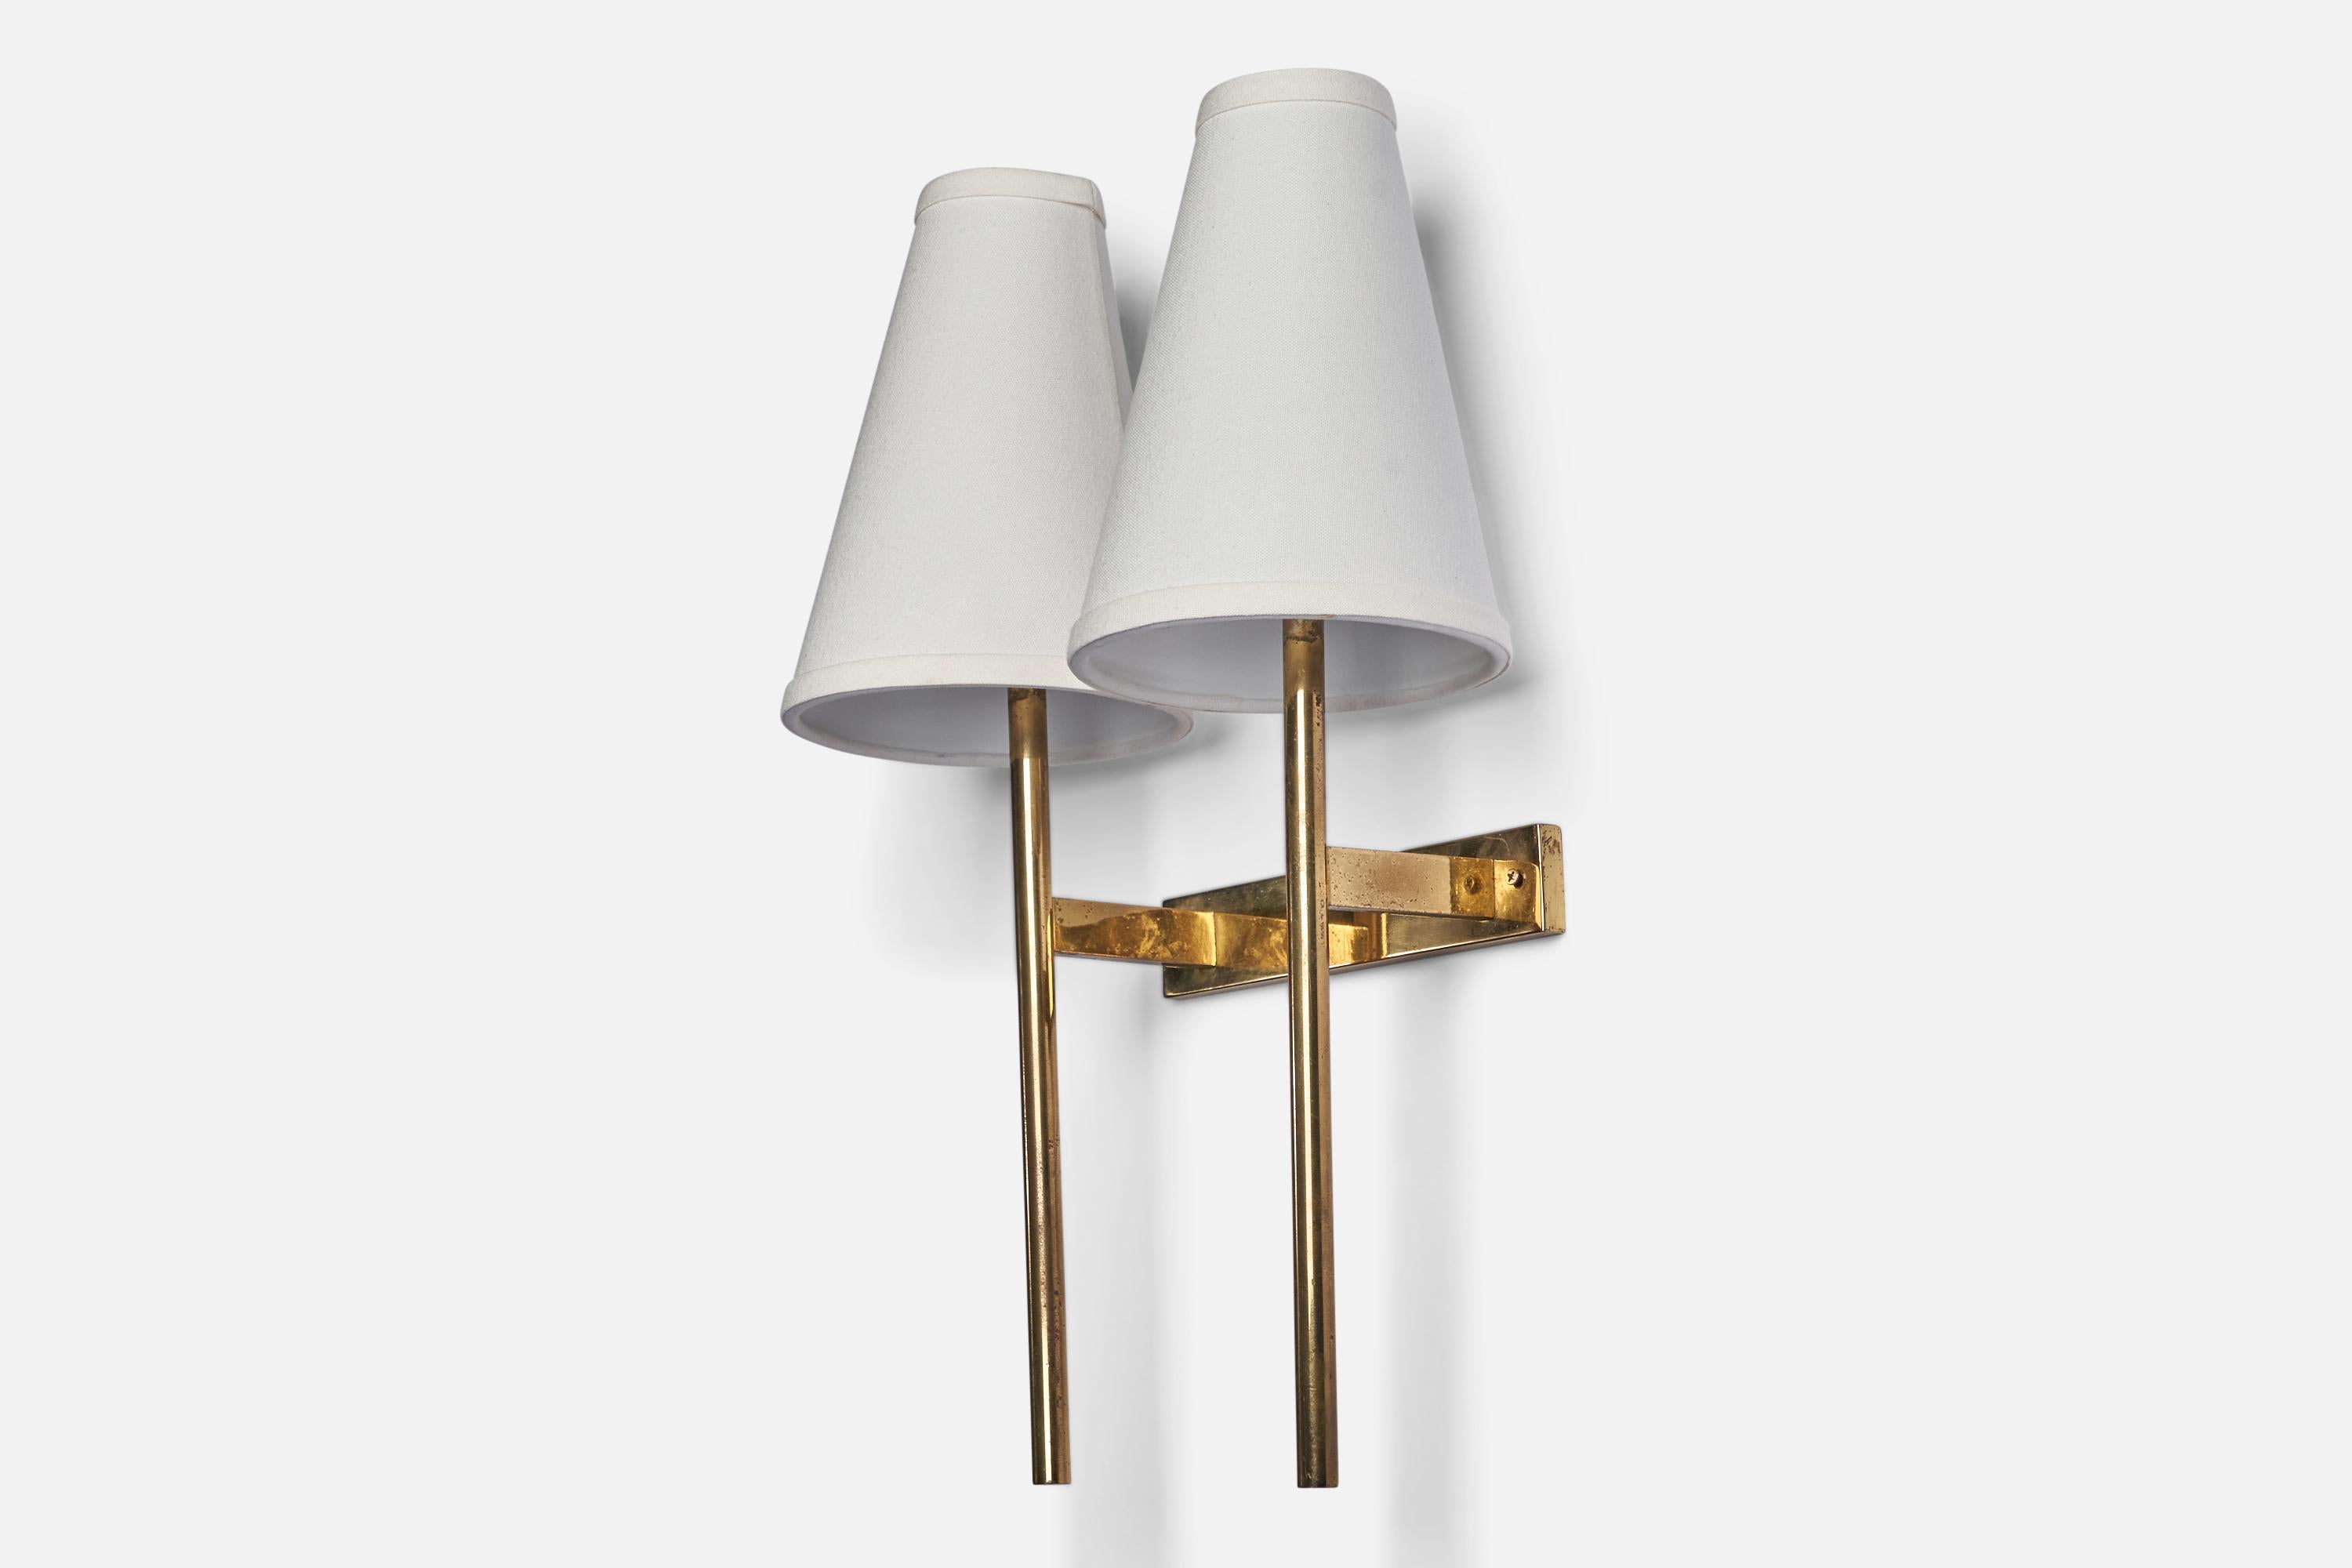 A two-armed brass and white fabric wall light, designed and produced in Italy, c. 1940s. 

Overall Dimensions (inches): 19.5